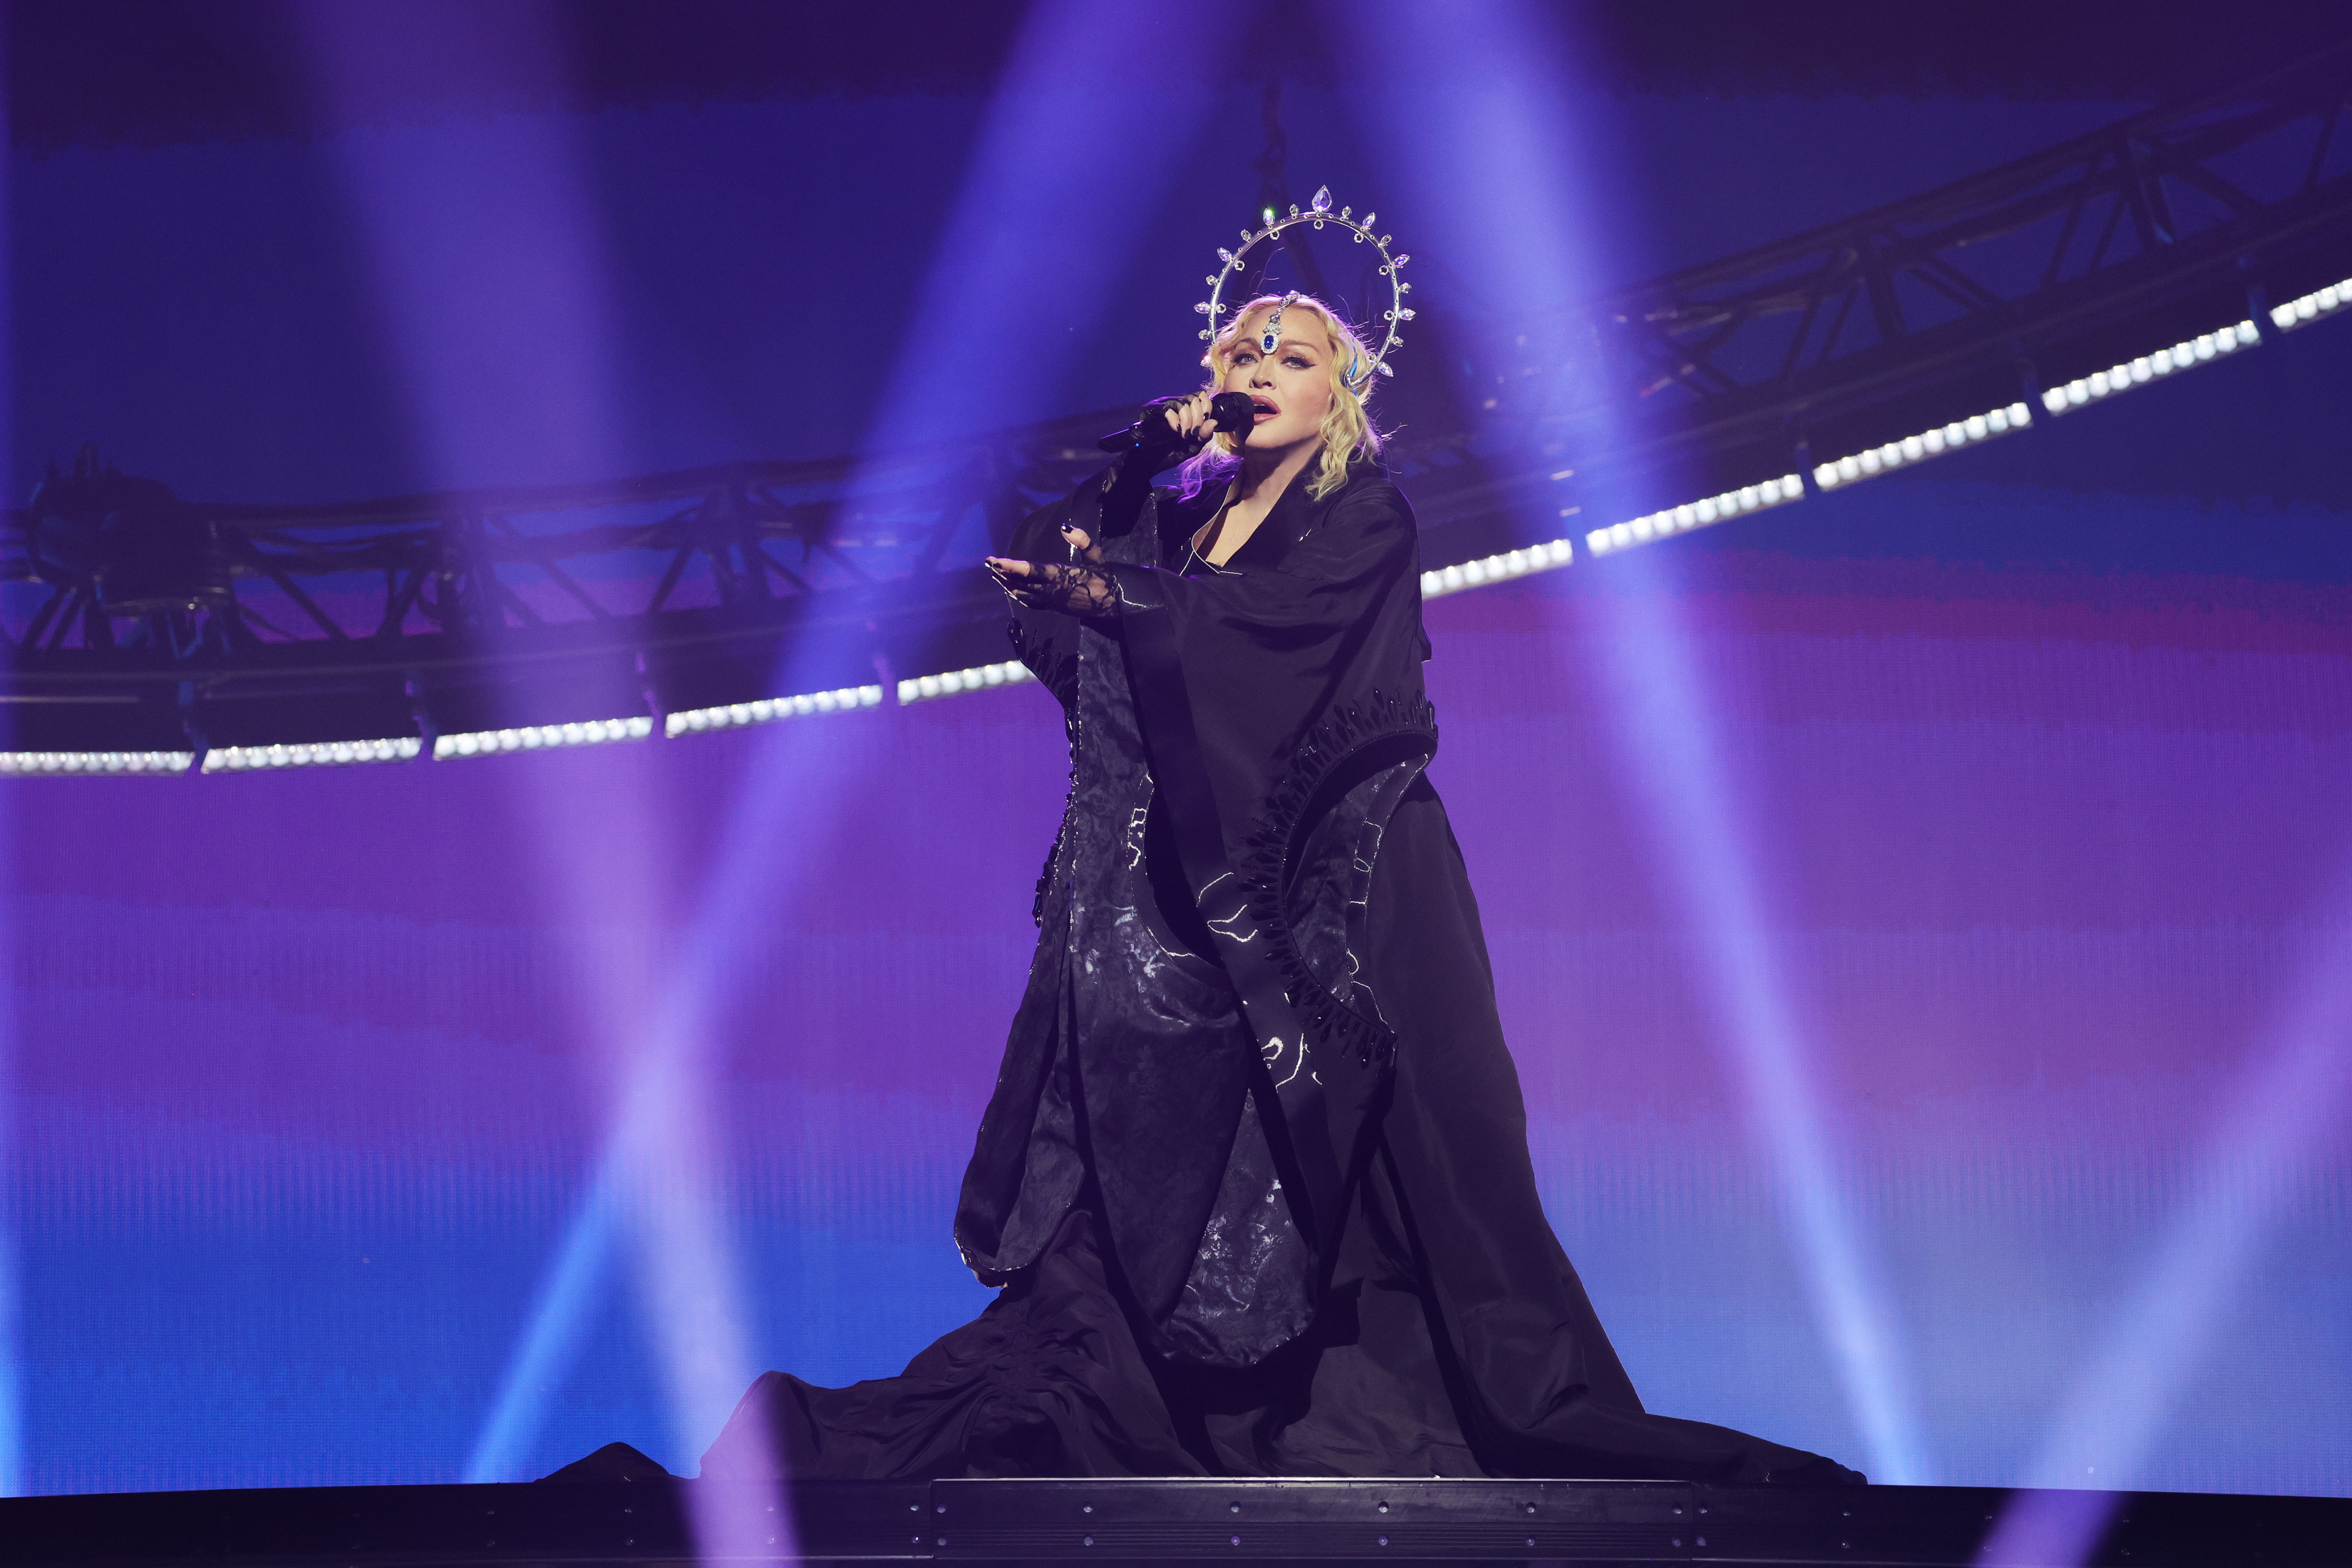 Madonna in an embellished halo-lie headpiece and robe sings onstage